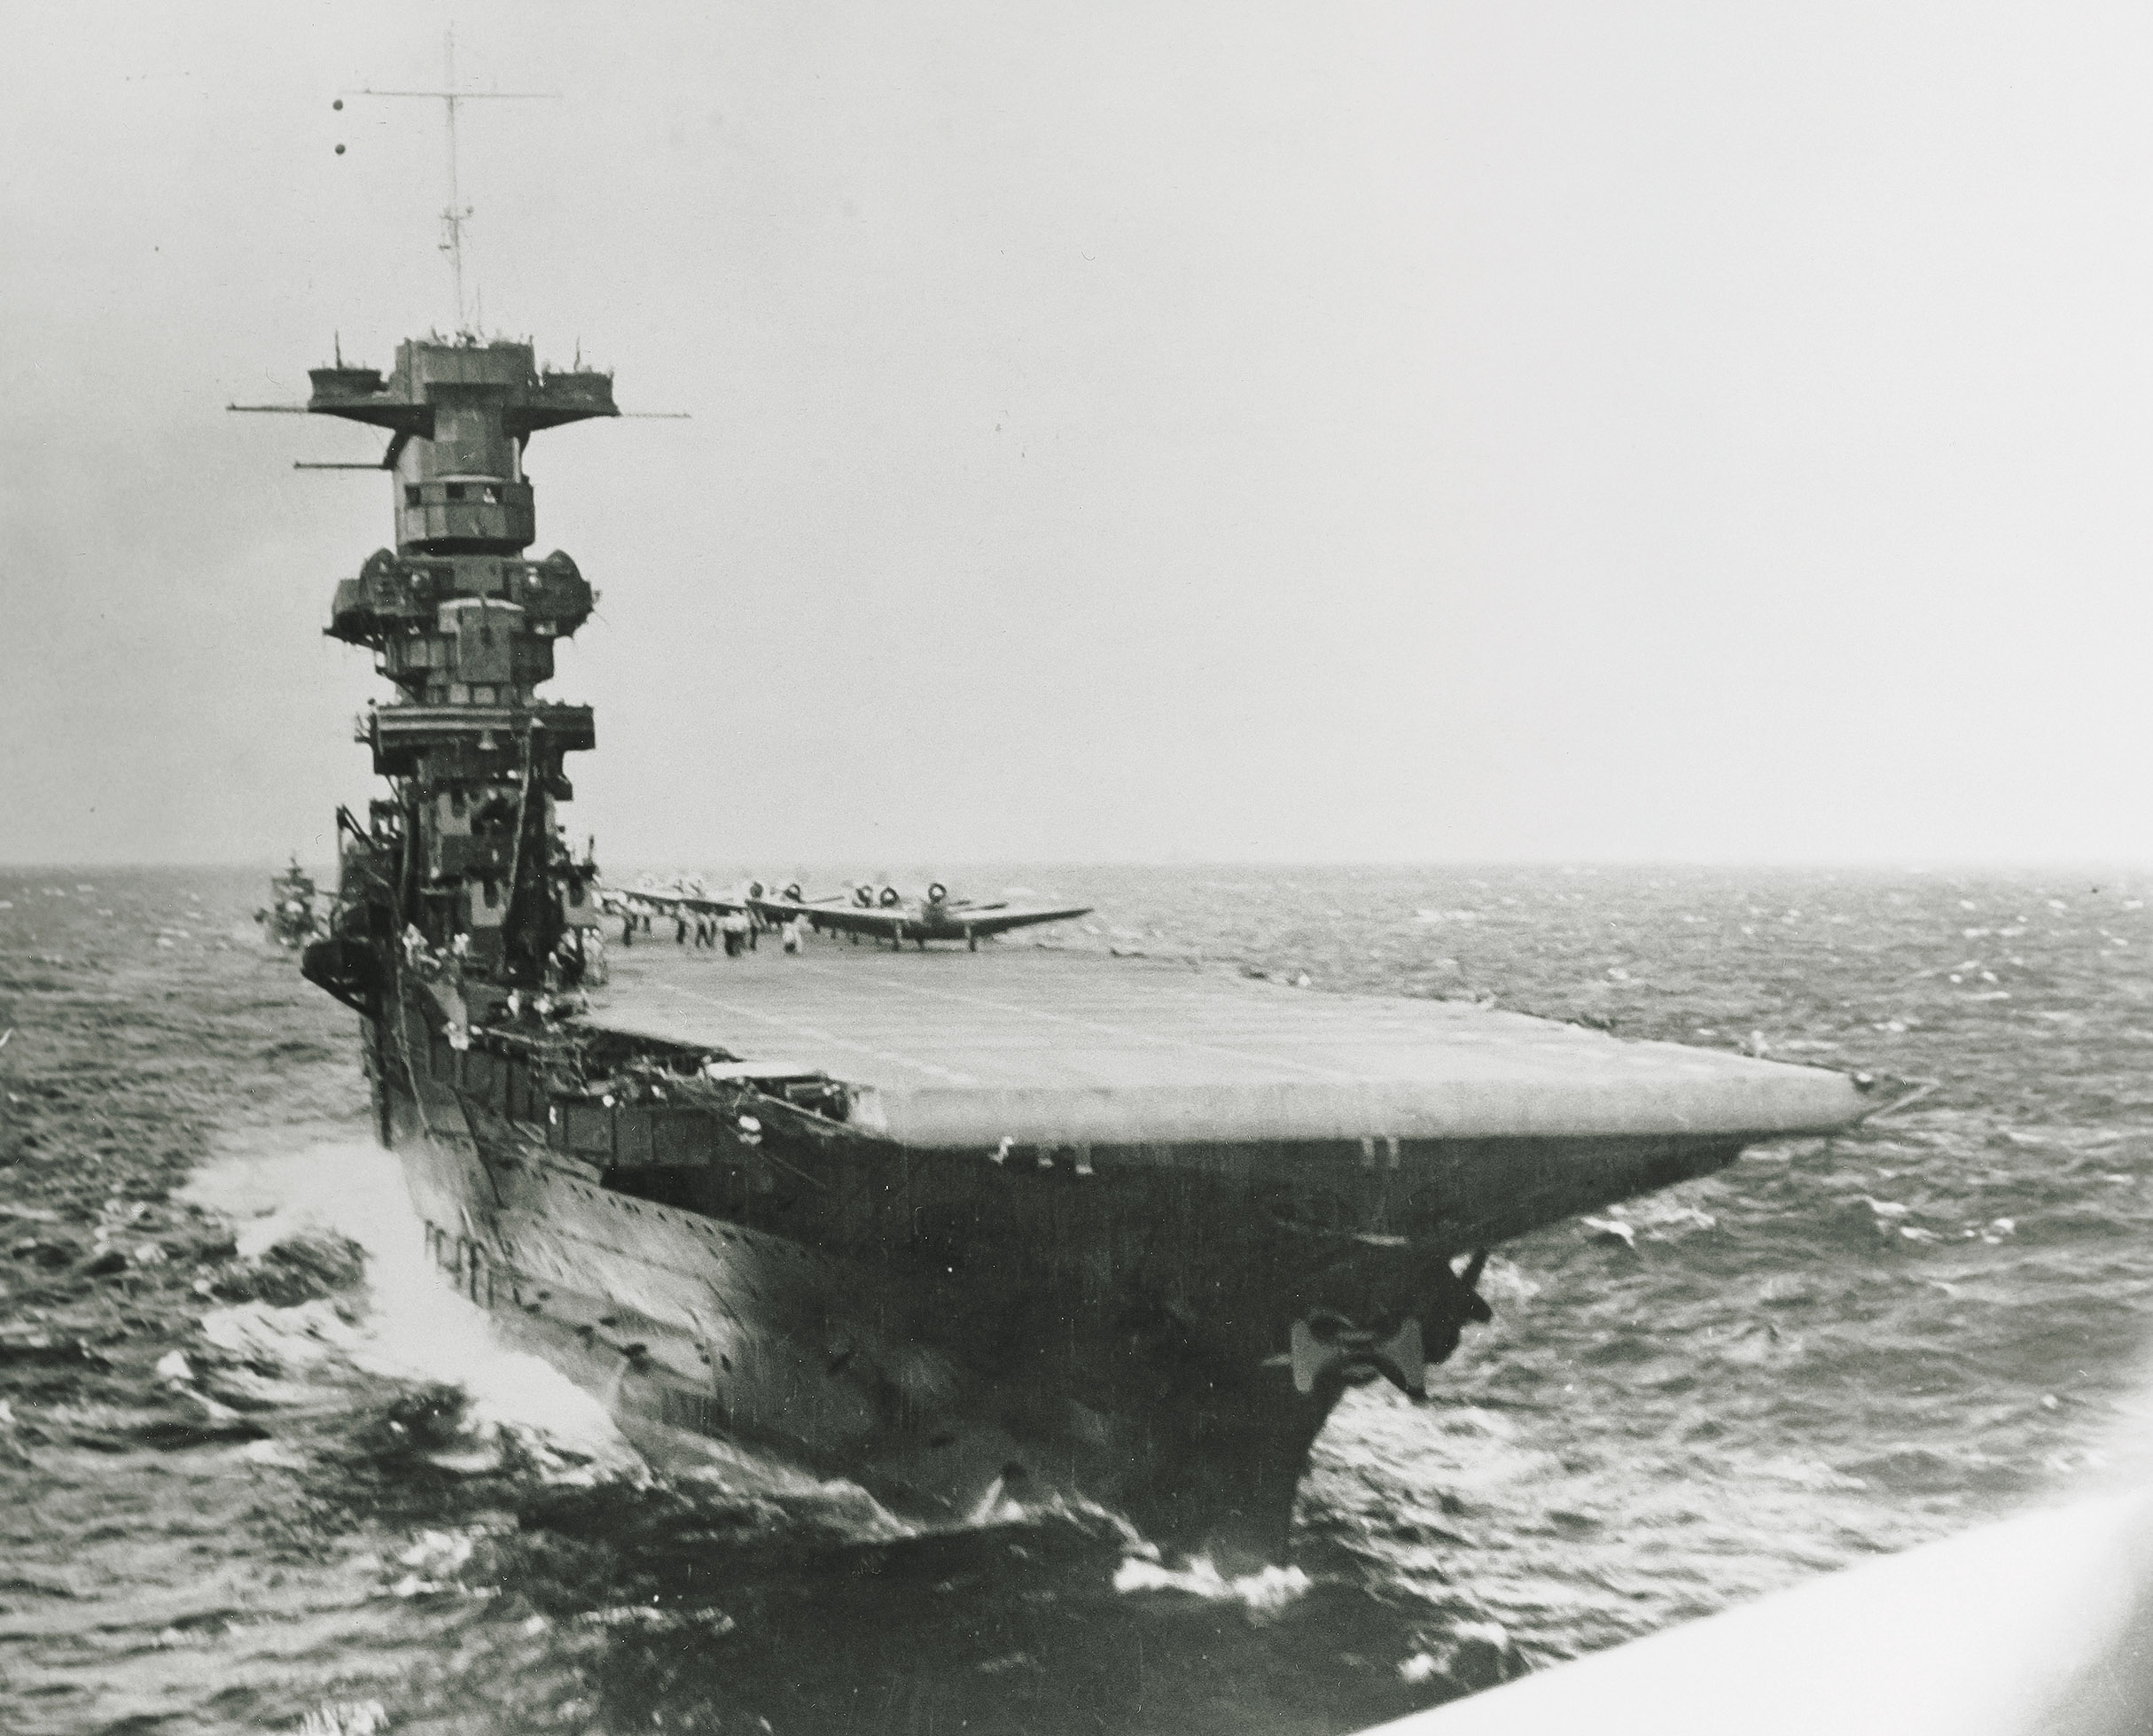 USS Saratoga (CV 3) launching planes, circa summer 1941, as seen from the rear cockpit of a plane that has just taken off.